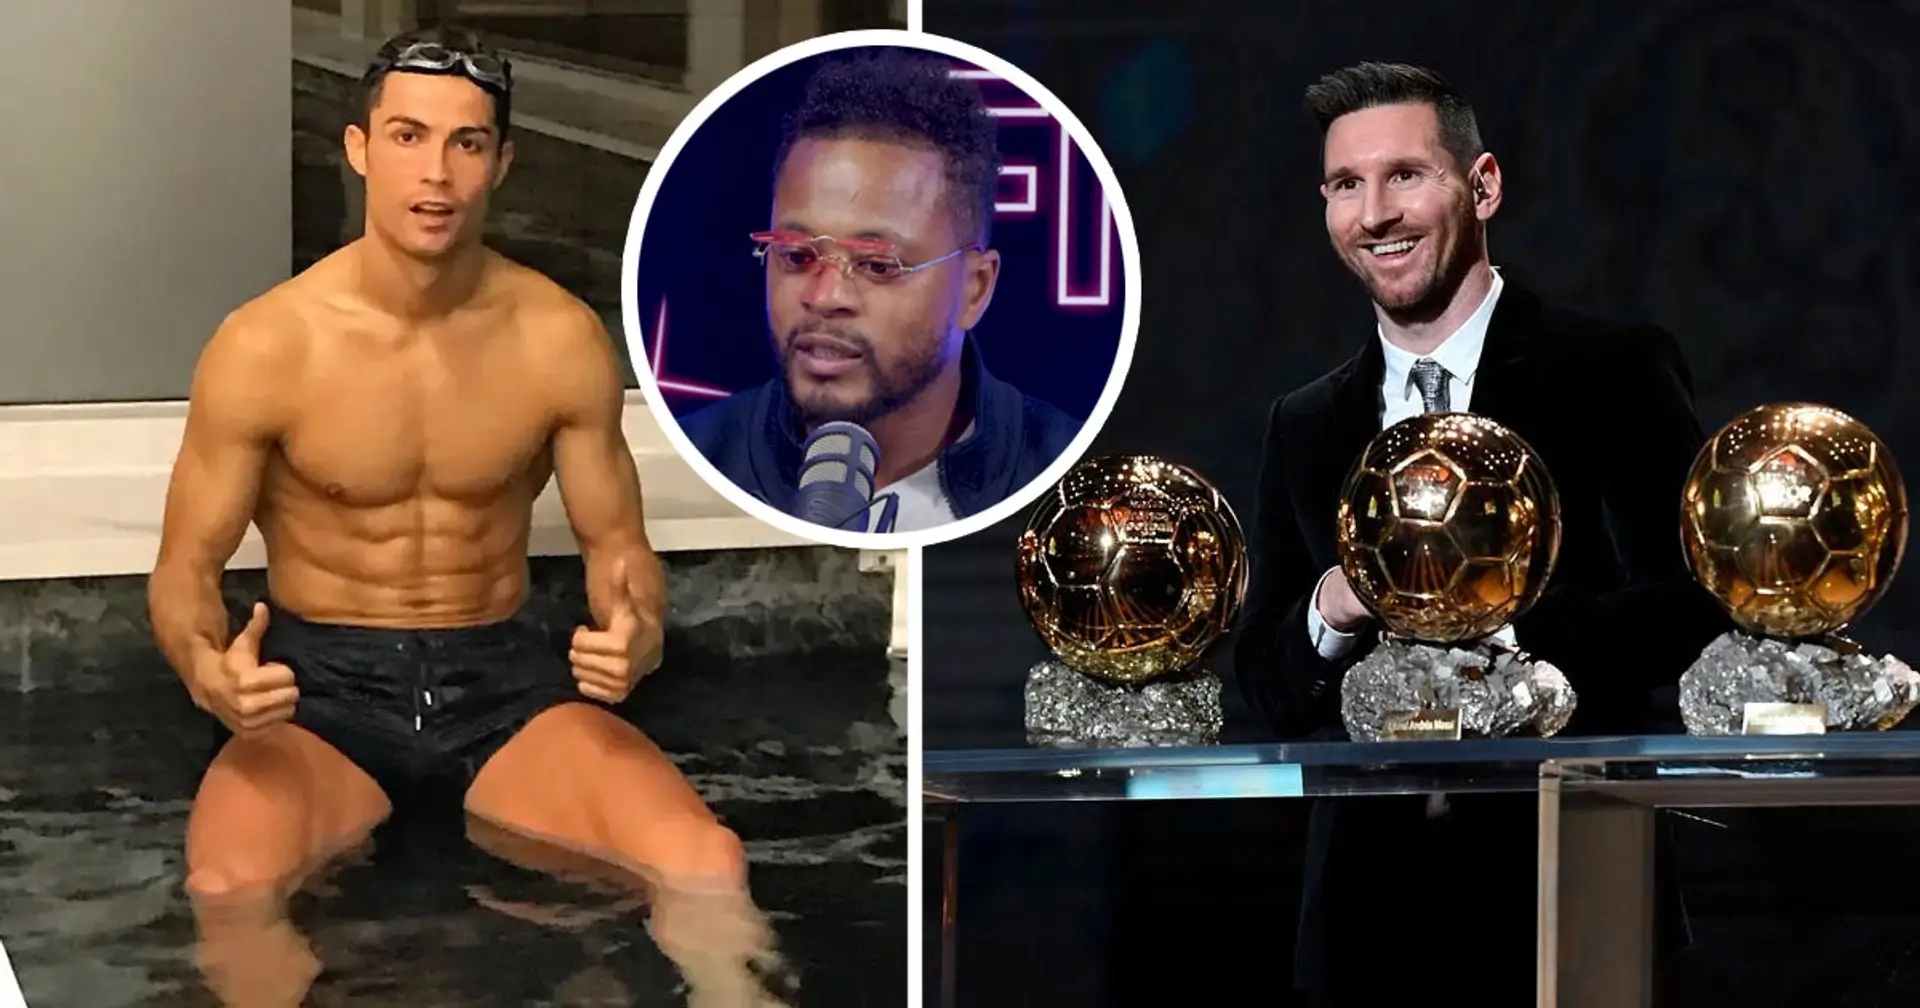 'If Messi had Ronaldo's work ethic, he'd have 15 Ballon d'Ors': Patrice Evra